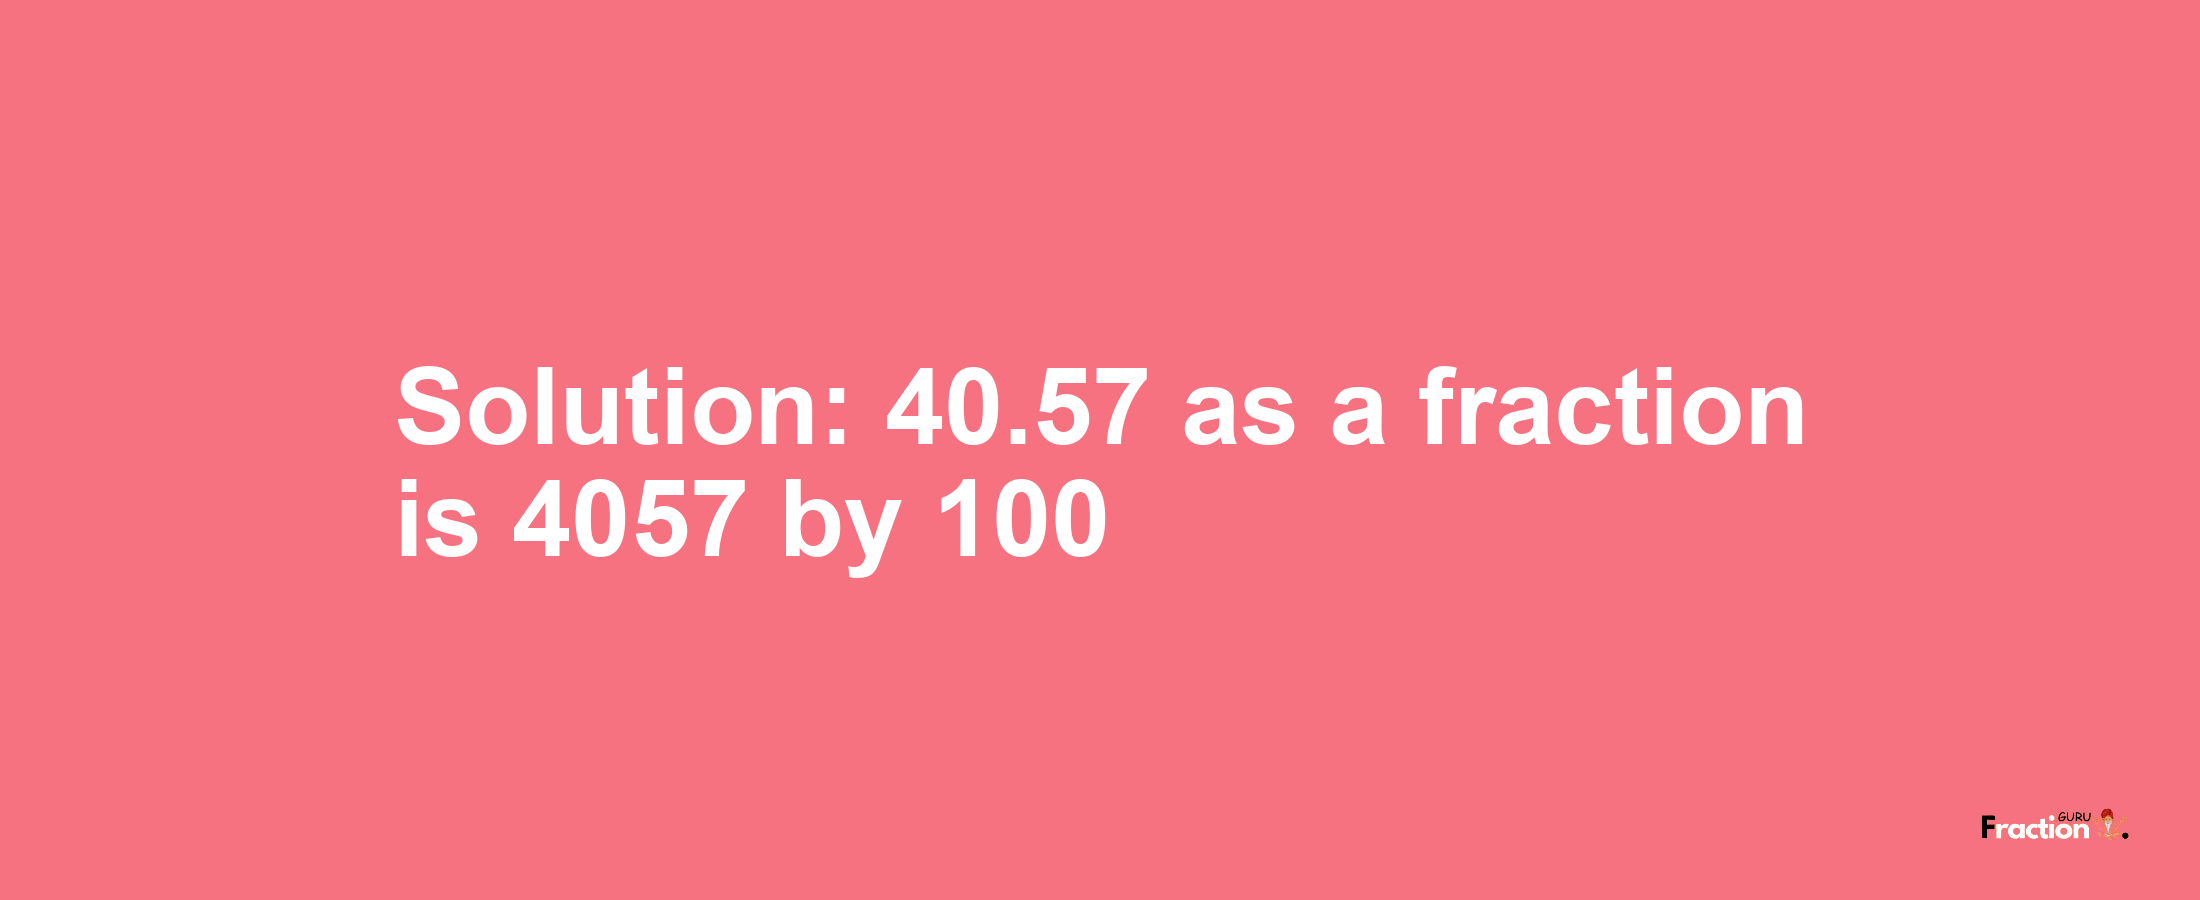 Solution:40.57 as a fraction is 4057/100